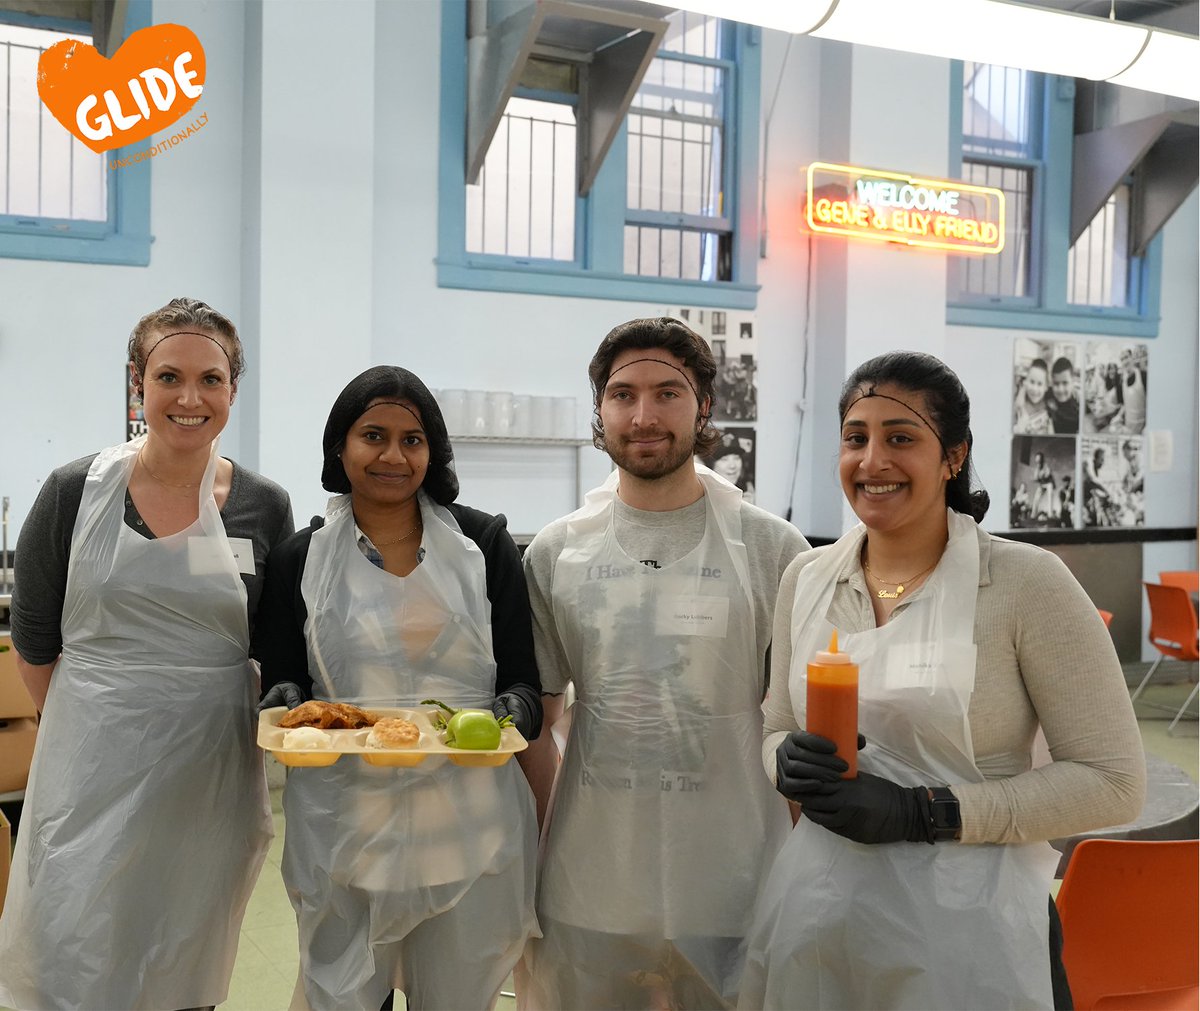 From code to compassion: Google gurus trade their keyboards for serving trays at GLIDE! Join us in spreading love and making a difference. Volunteer with GLIDE today: bit.ly/3ZBqnQc!! #GlideCommunity #VolunteerAppreciation🧡